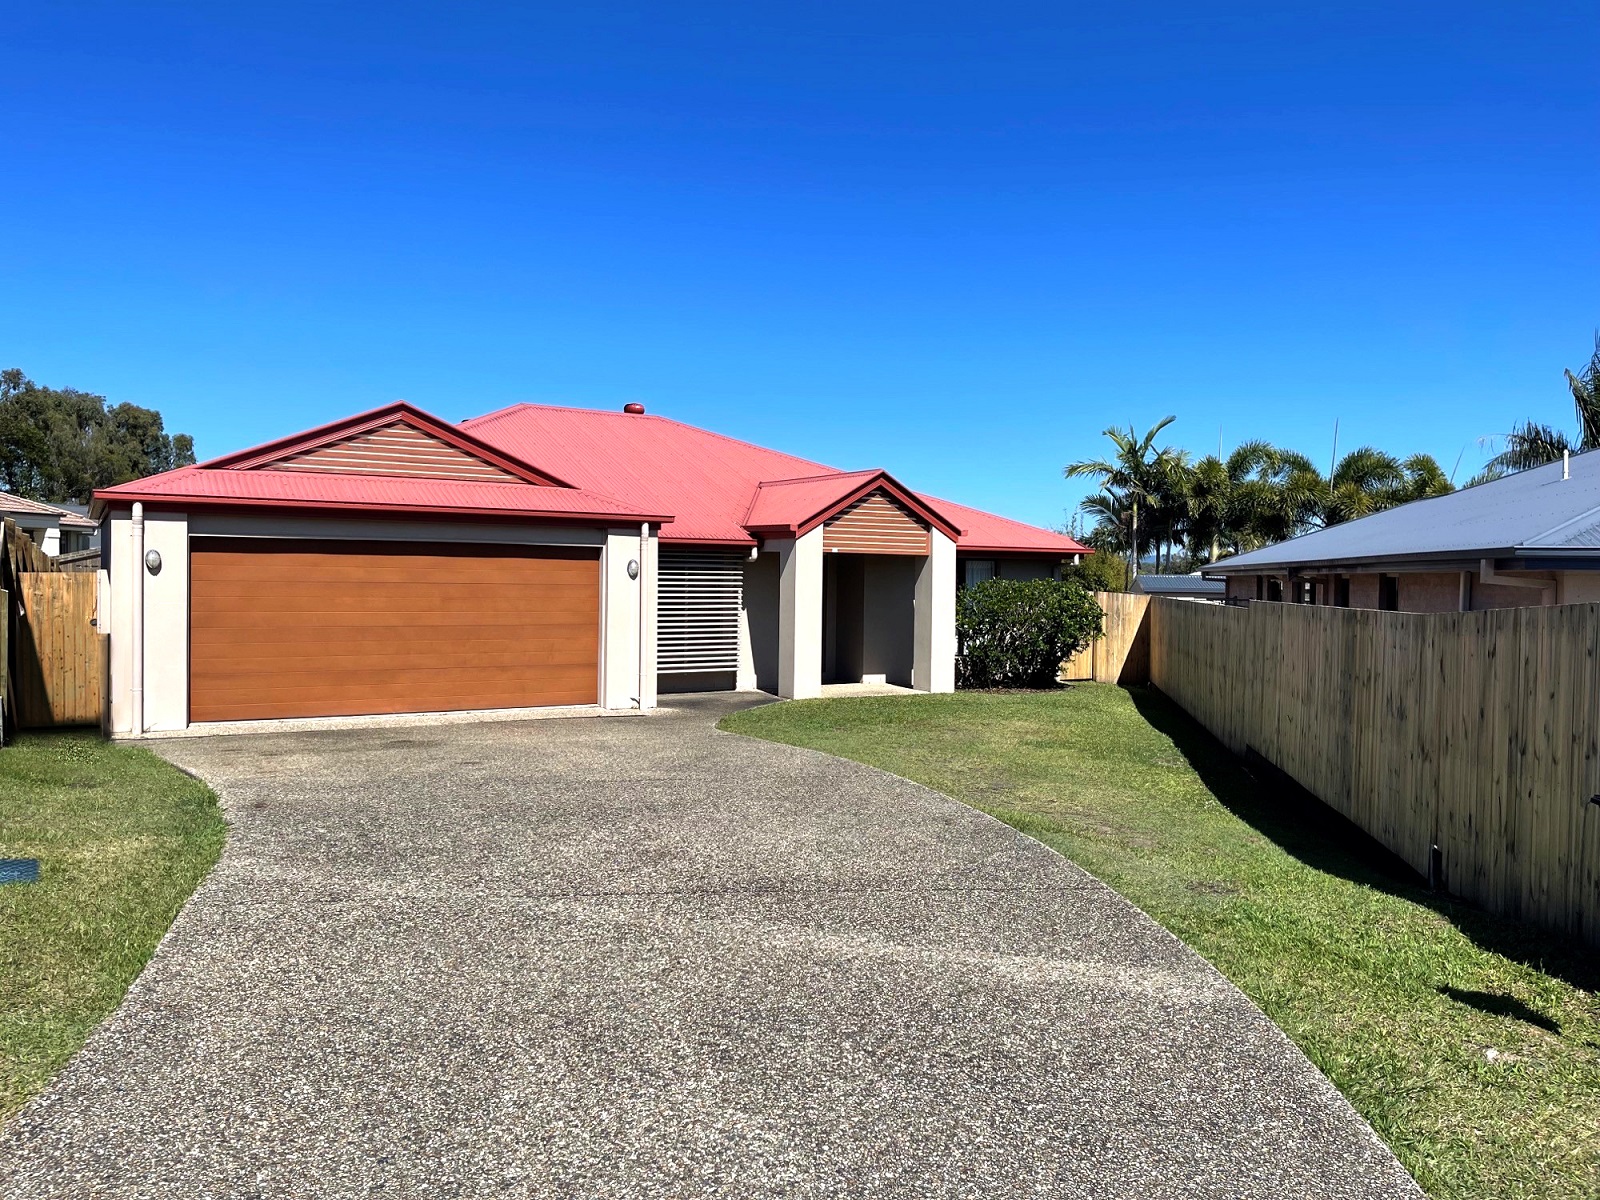 SIL Vacancy in Sunshine Coast showing the front of a low set home and driveway